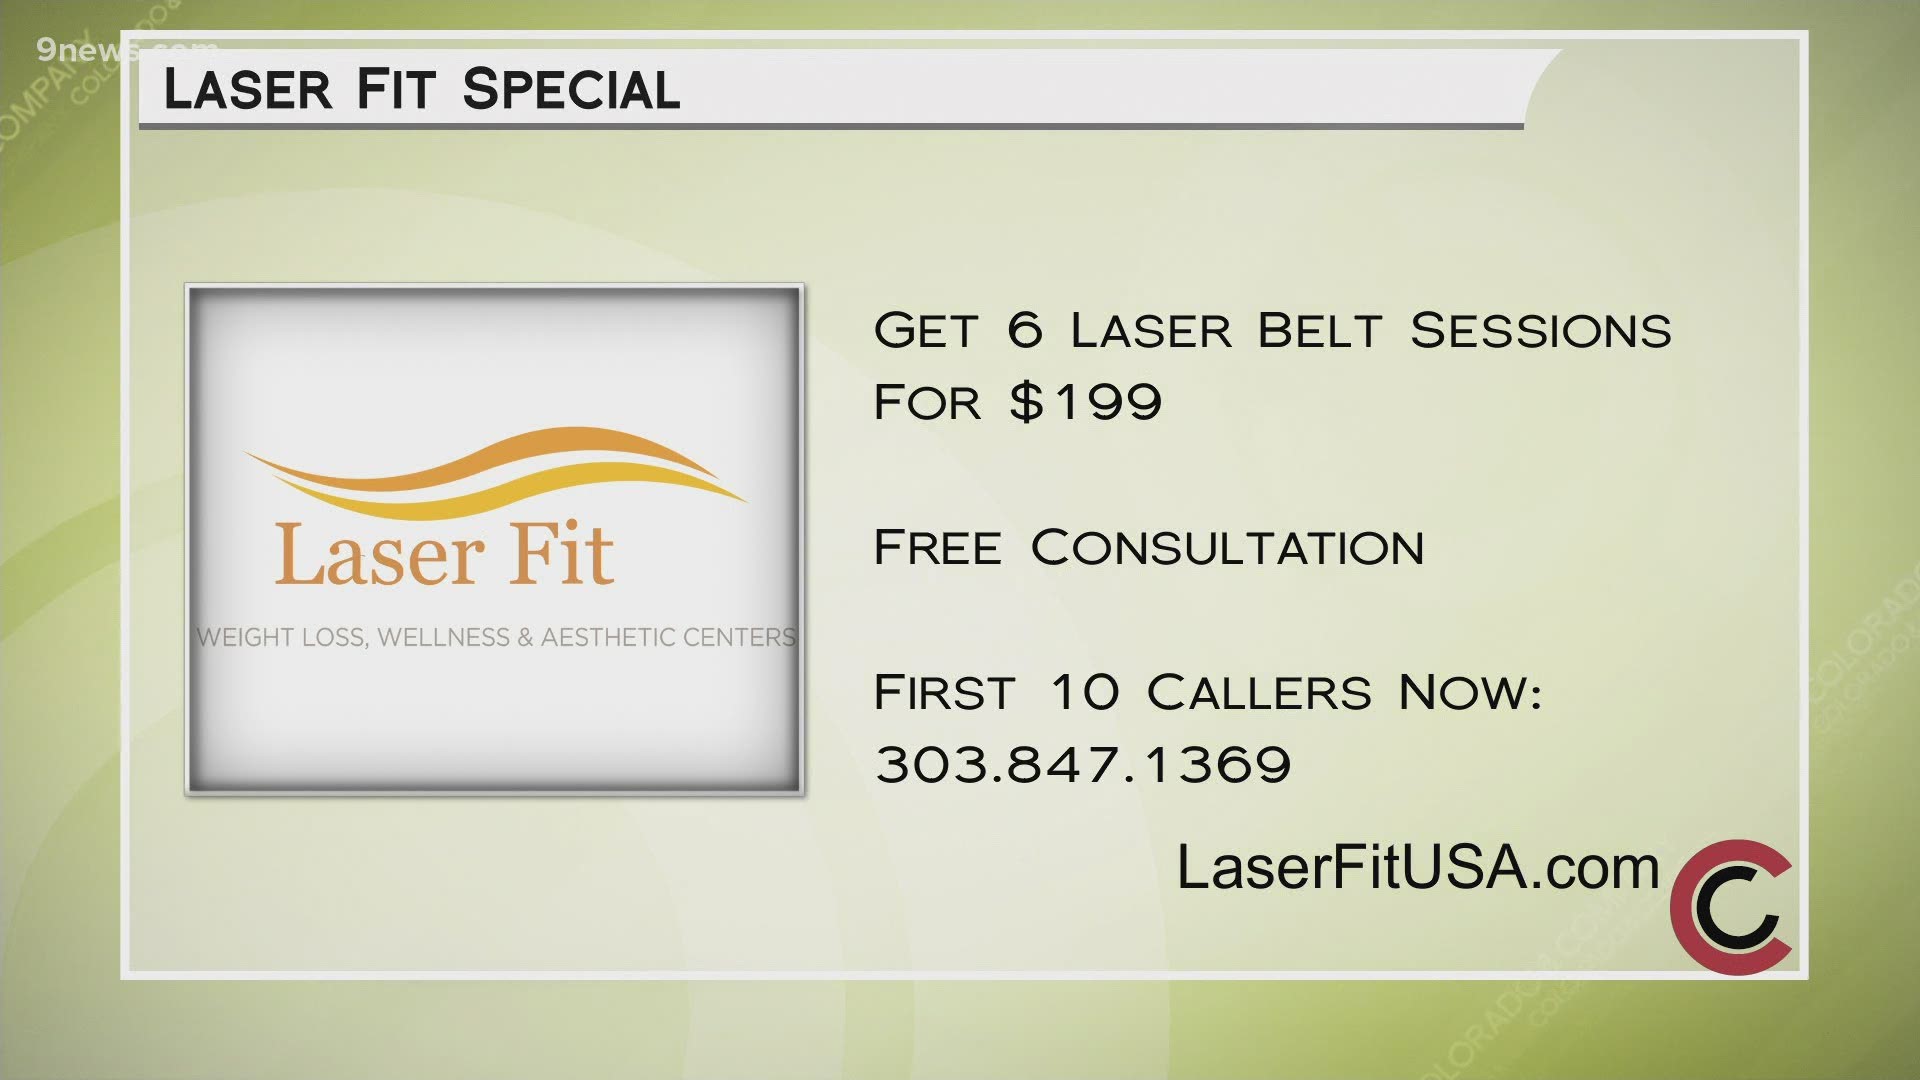 Call 303.847.1369 or visit LaserFitUSA.com to get started with the FDA-cleared Laser Belt to jumpstart your inch-loss journey.